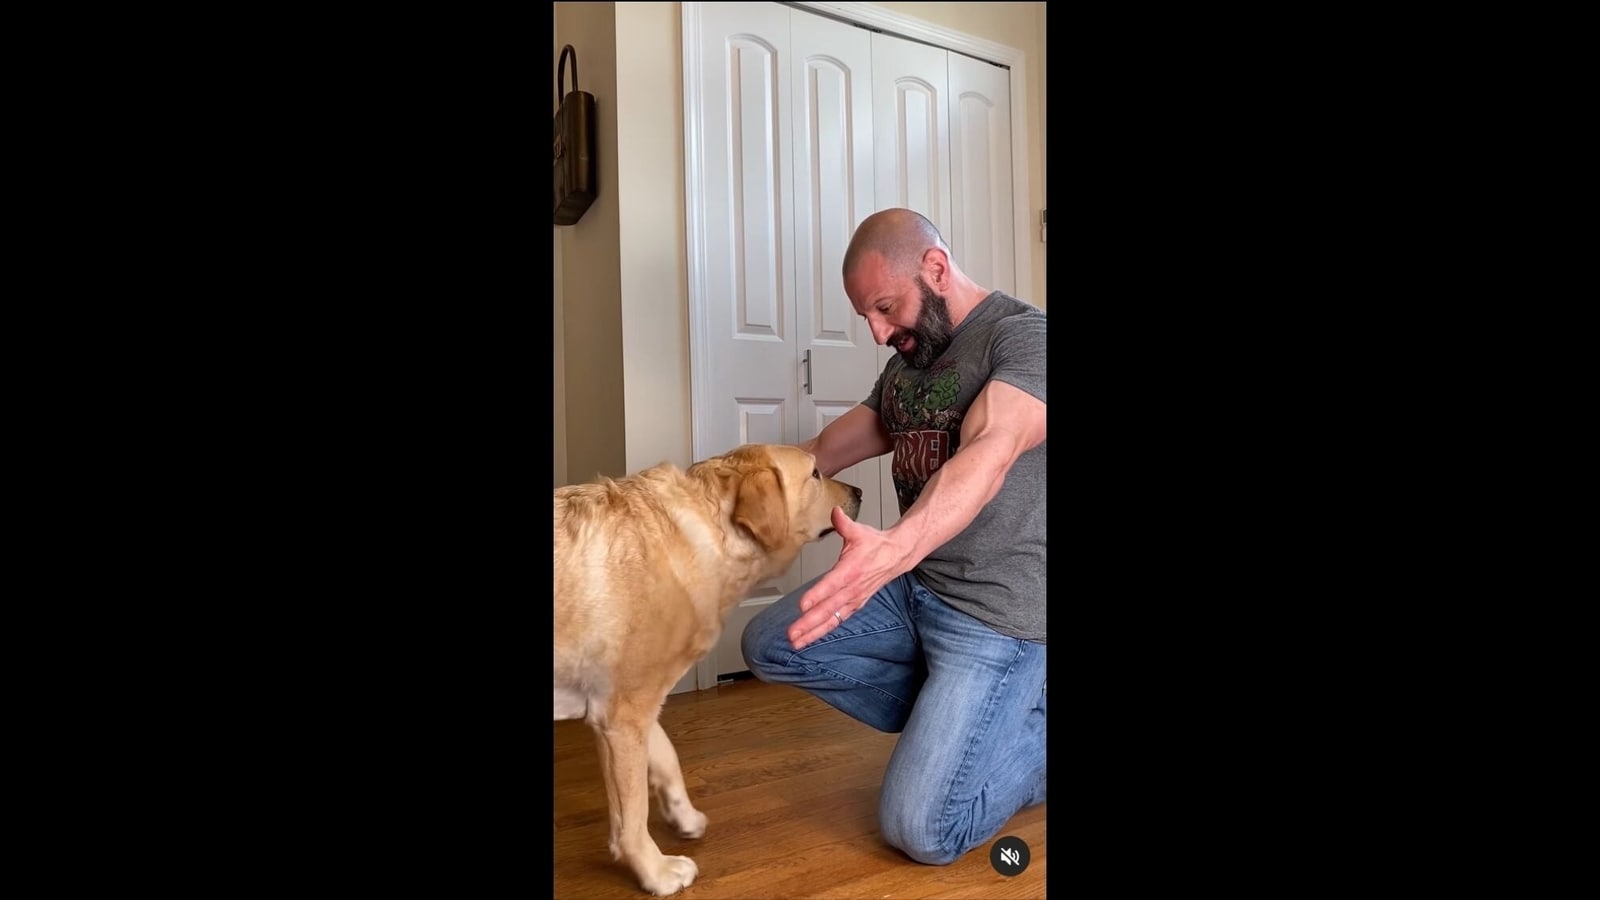 This is what a dog does when his human smells of another dog. Watch